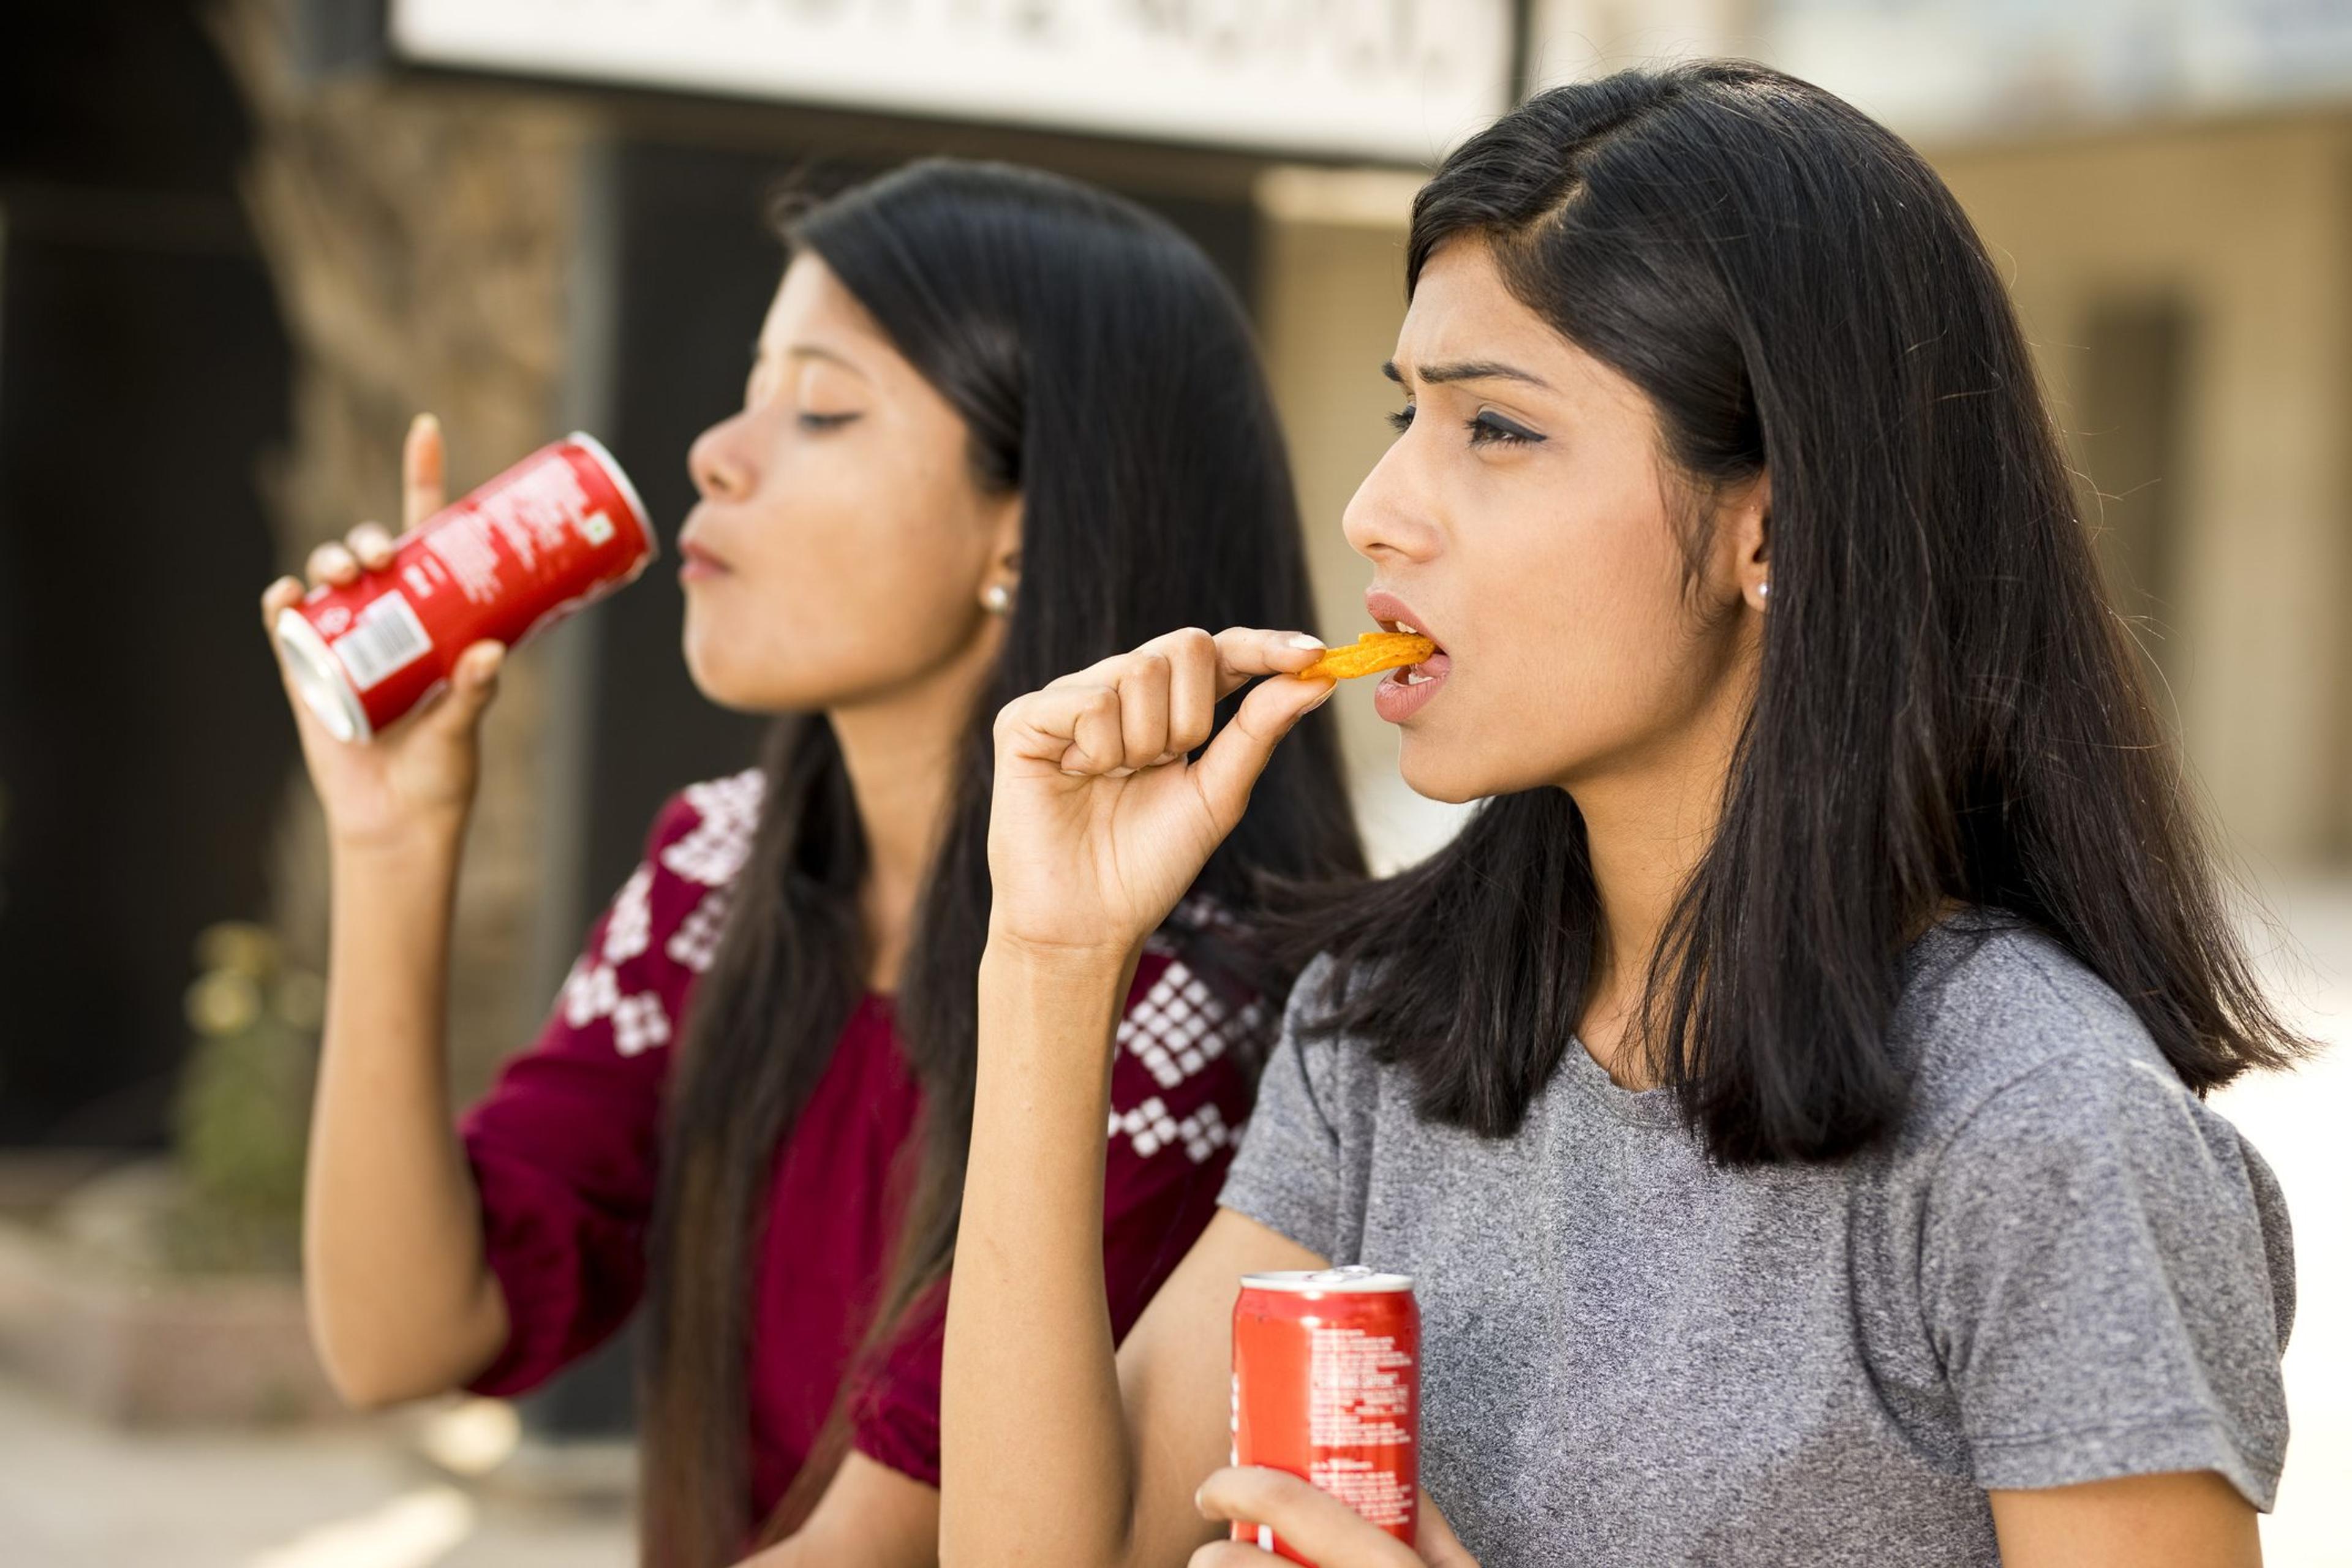 Young girls eating potato chips and holding pop can